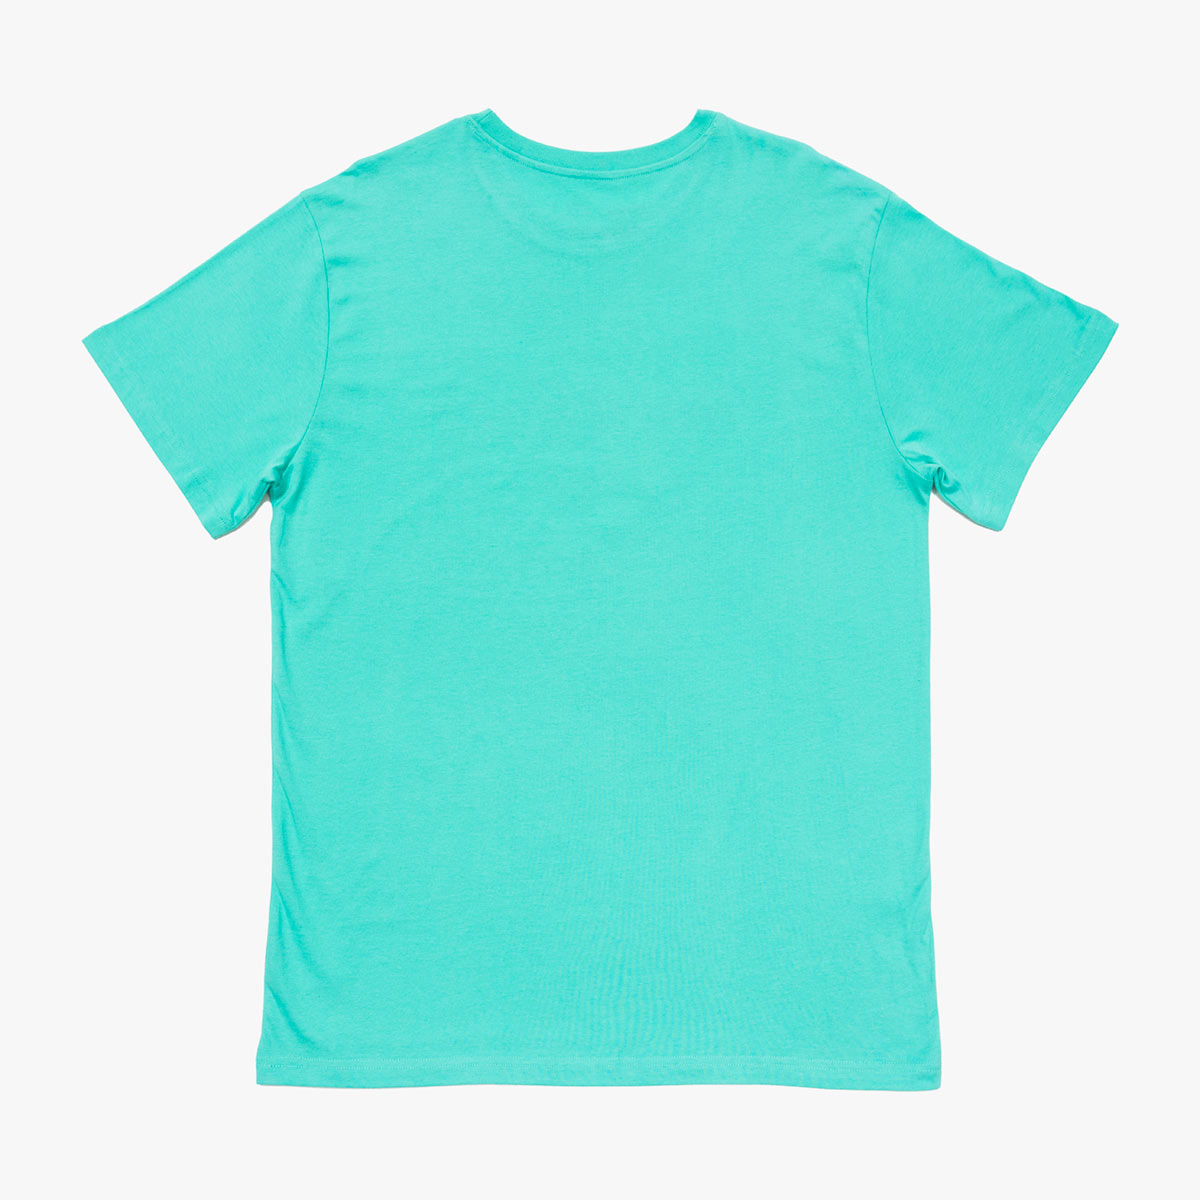 Adult Fit Pop of Color Tee in Teal image number 3